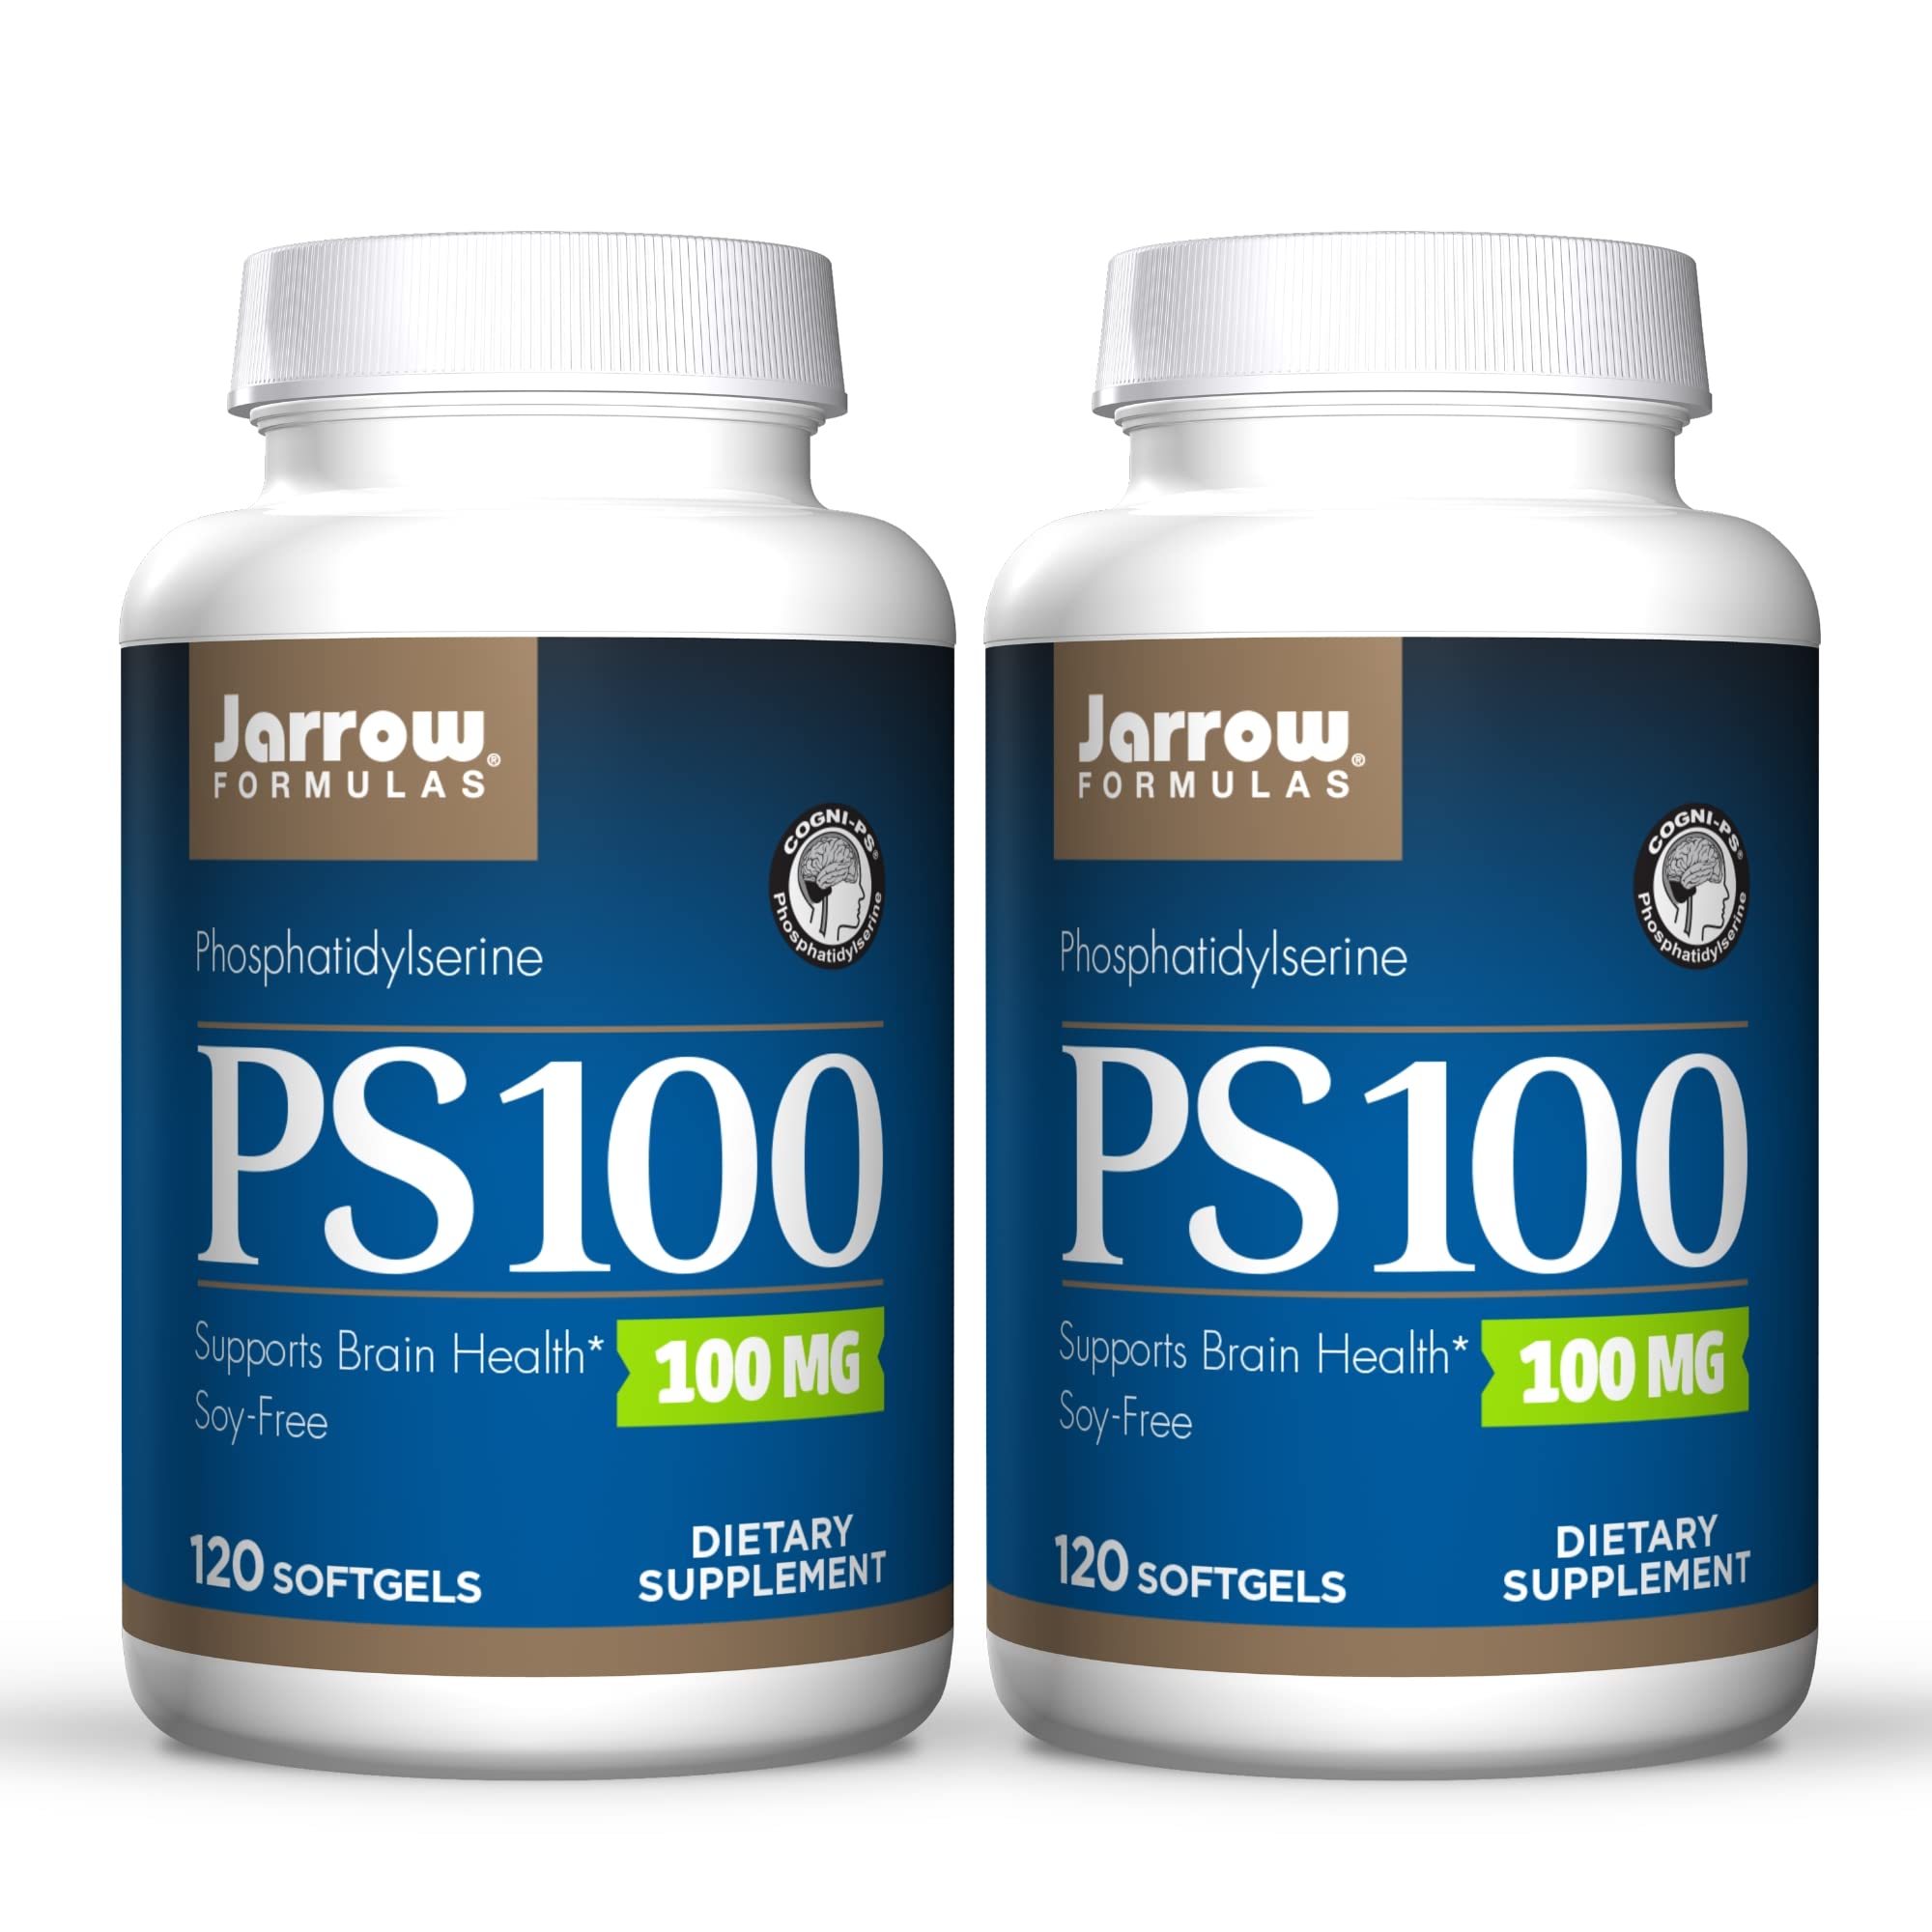 Jarrow Formulas PS 100 - 120 Softgels, Pack of 2 - 100 mg Phosphatidylserine (PS) - Supports Brain Health - Soy Free - Up to 240 Total Servings